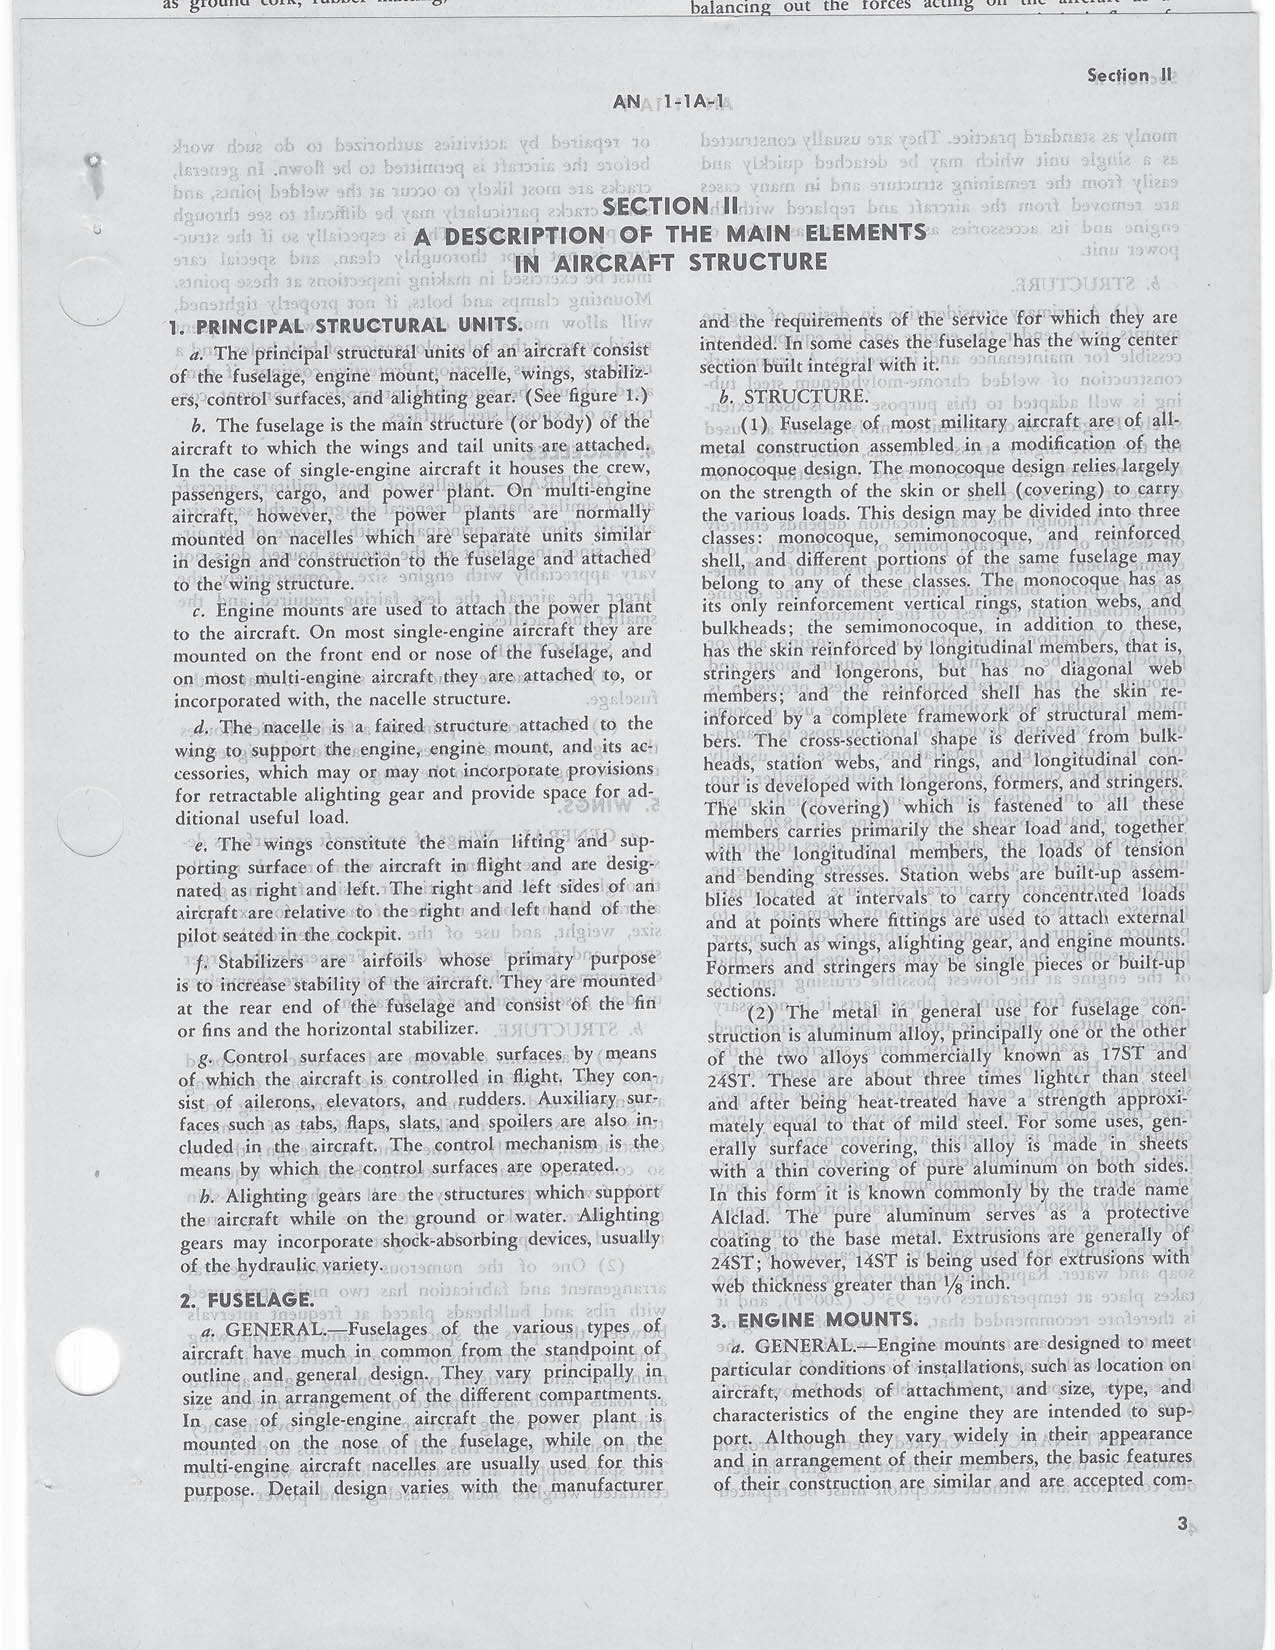 Sample page 9 from AirCorps Library document: General Manual for Structural Repair